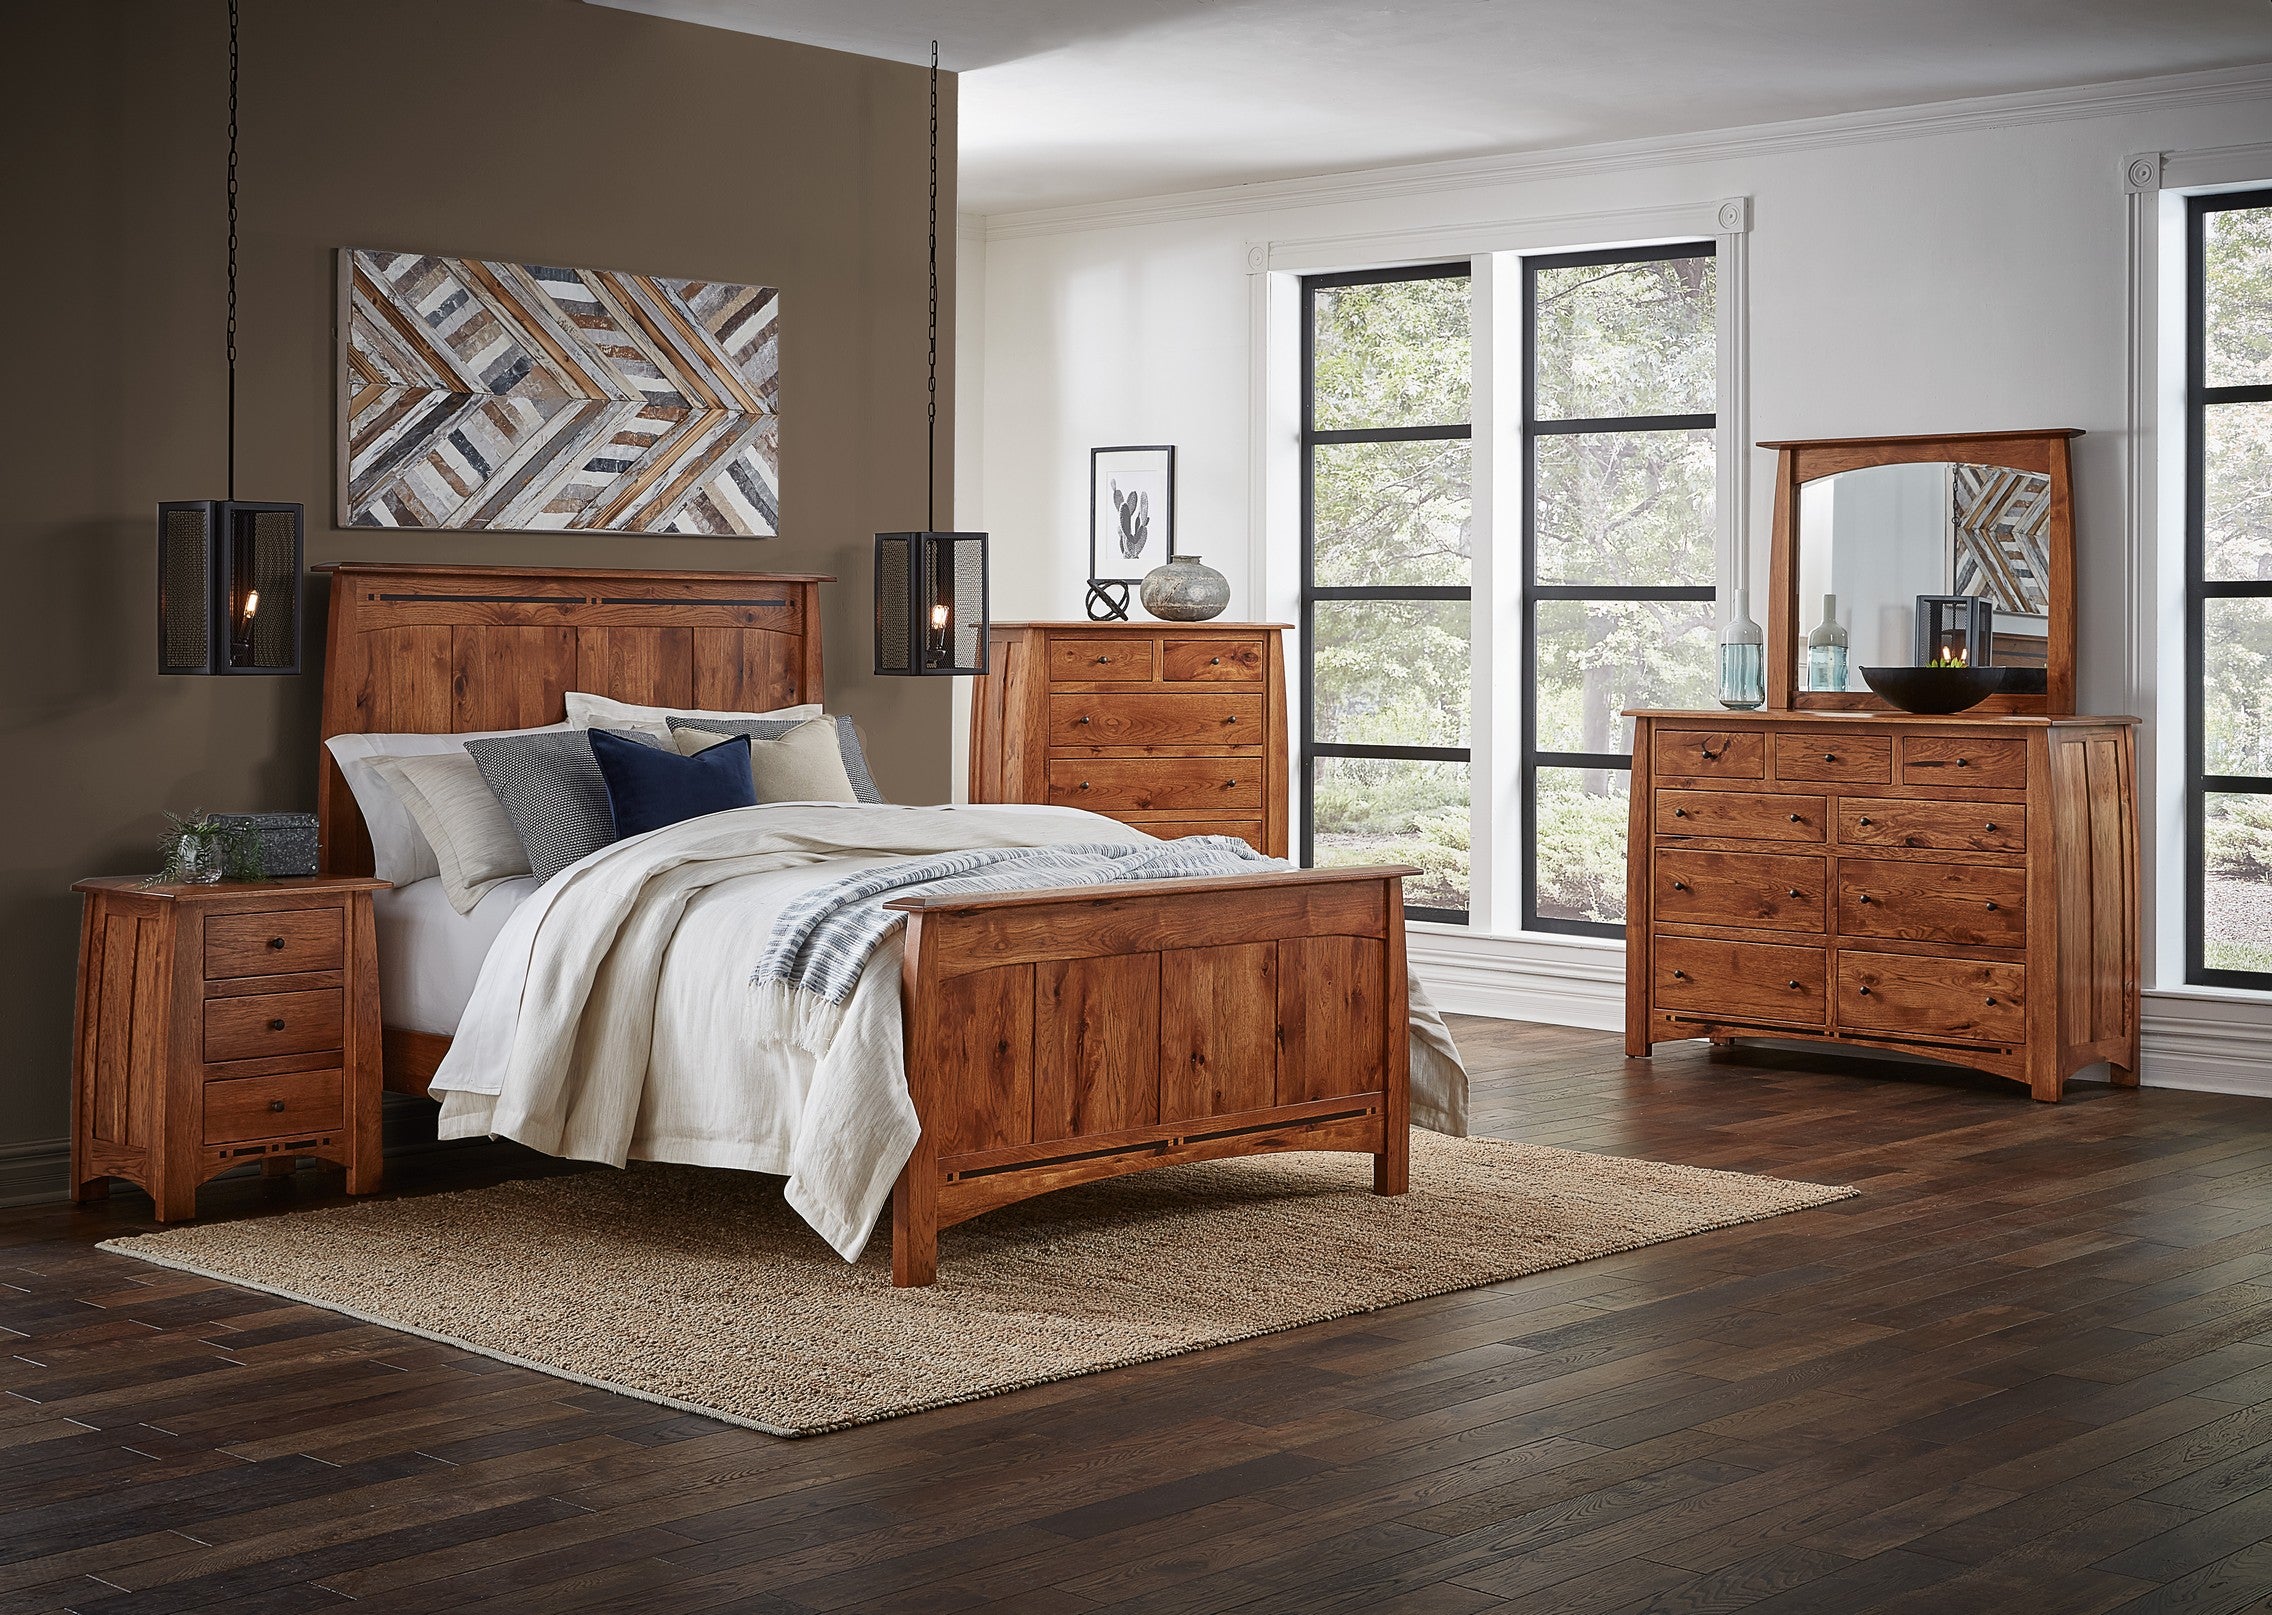 boulder creek collection room setting in rustic hickory with golden pecan stain